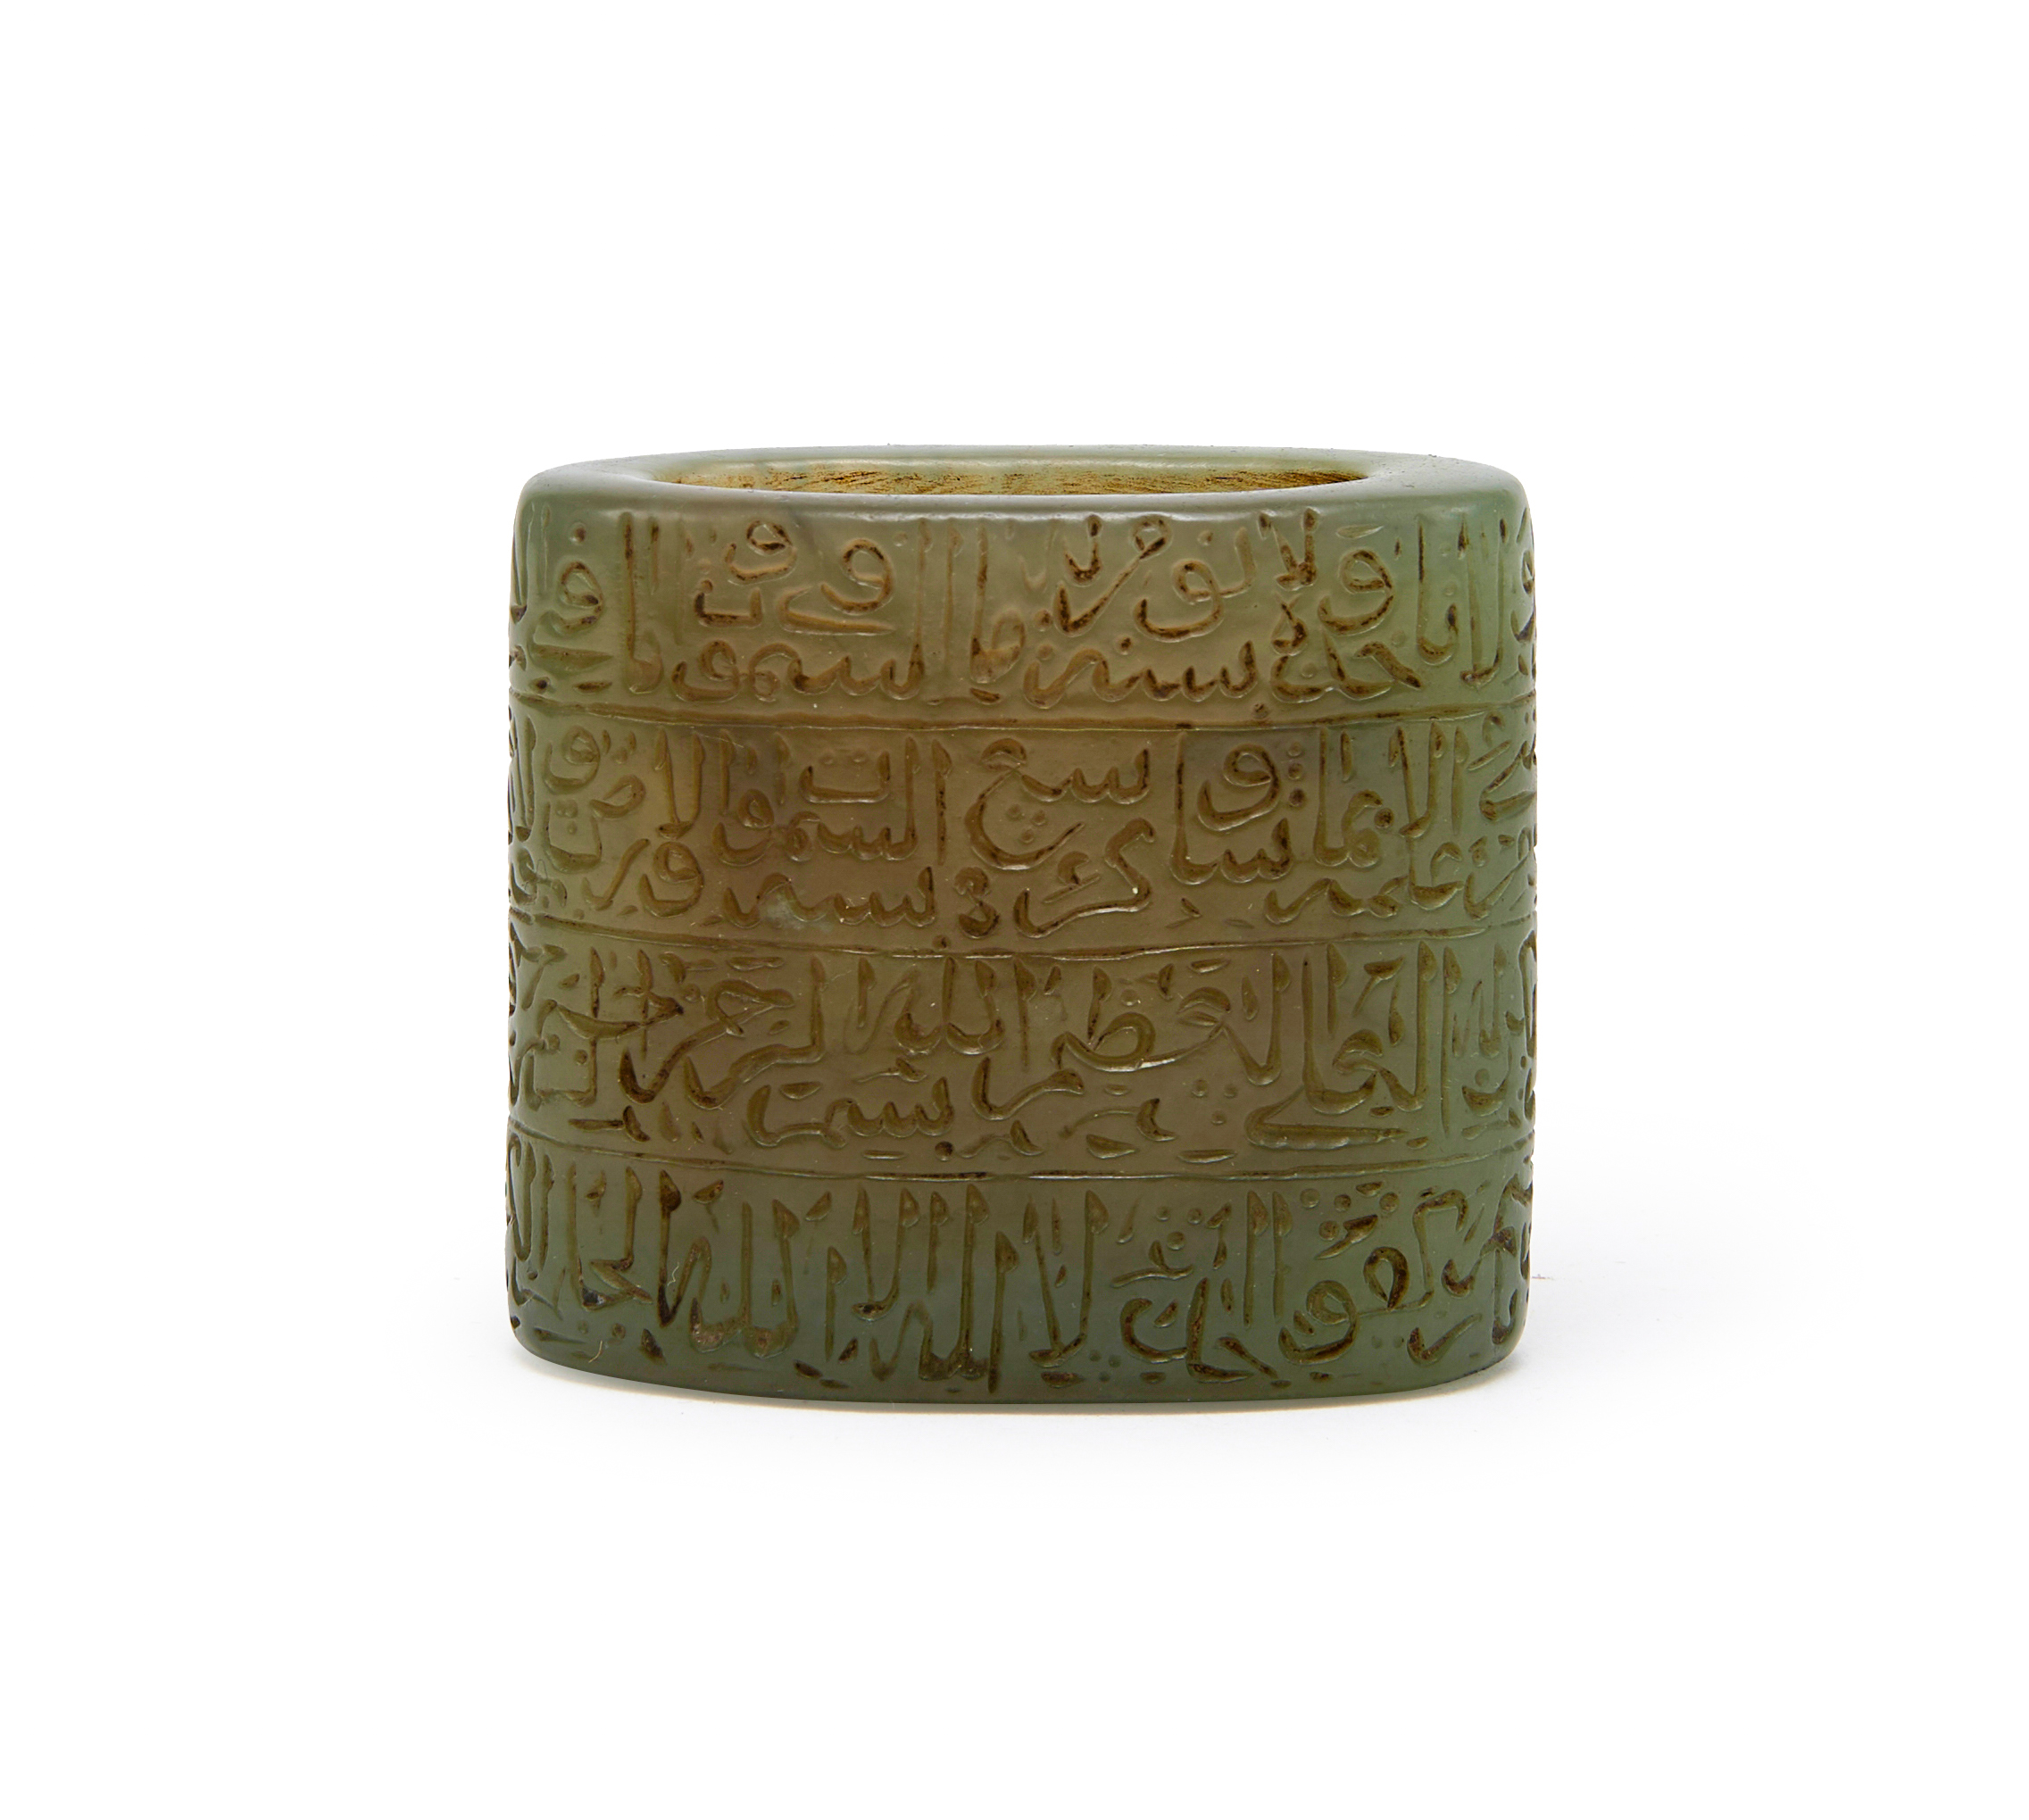 A RARE CALLIGRAPHIC INSCRIBED JADE INKWELL, 18TH CENTURY, MUGHAL, INDIA - Image 3 of 7